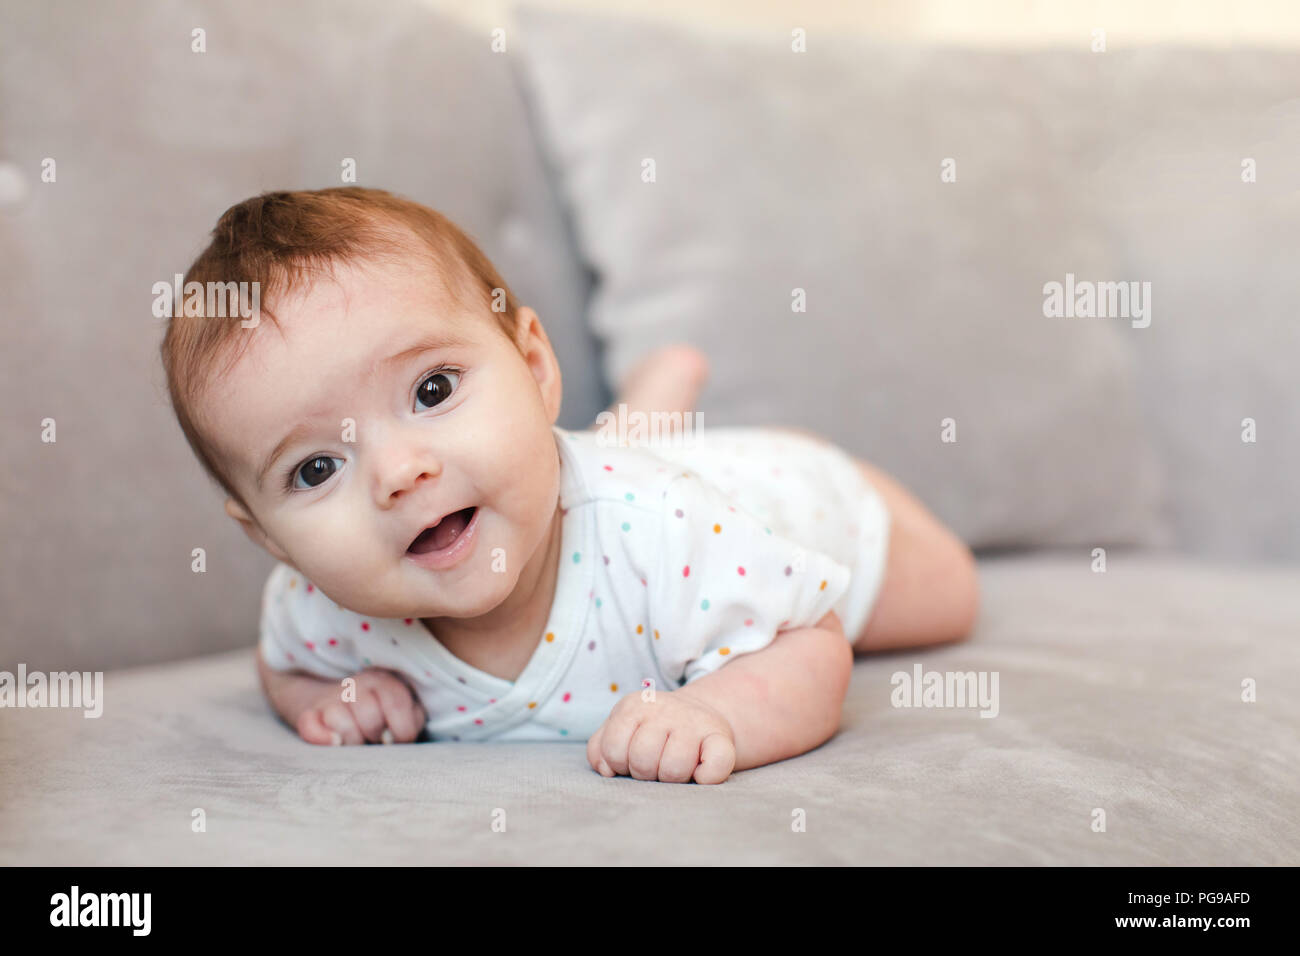 Baby lying on sofa and looking at camera Stock Photo